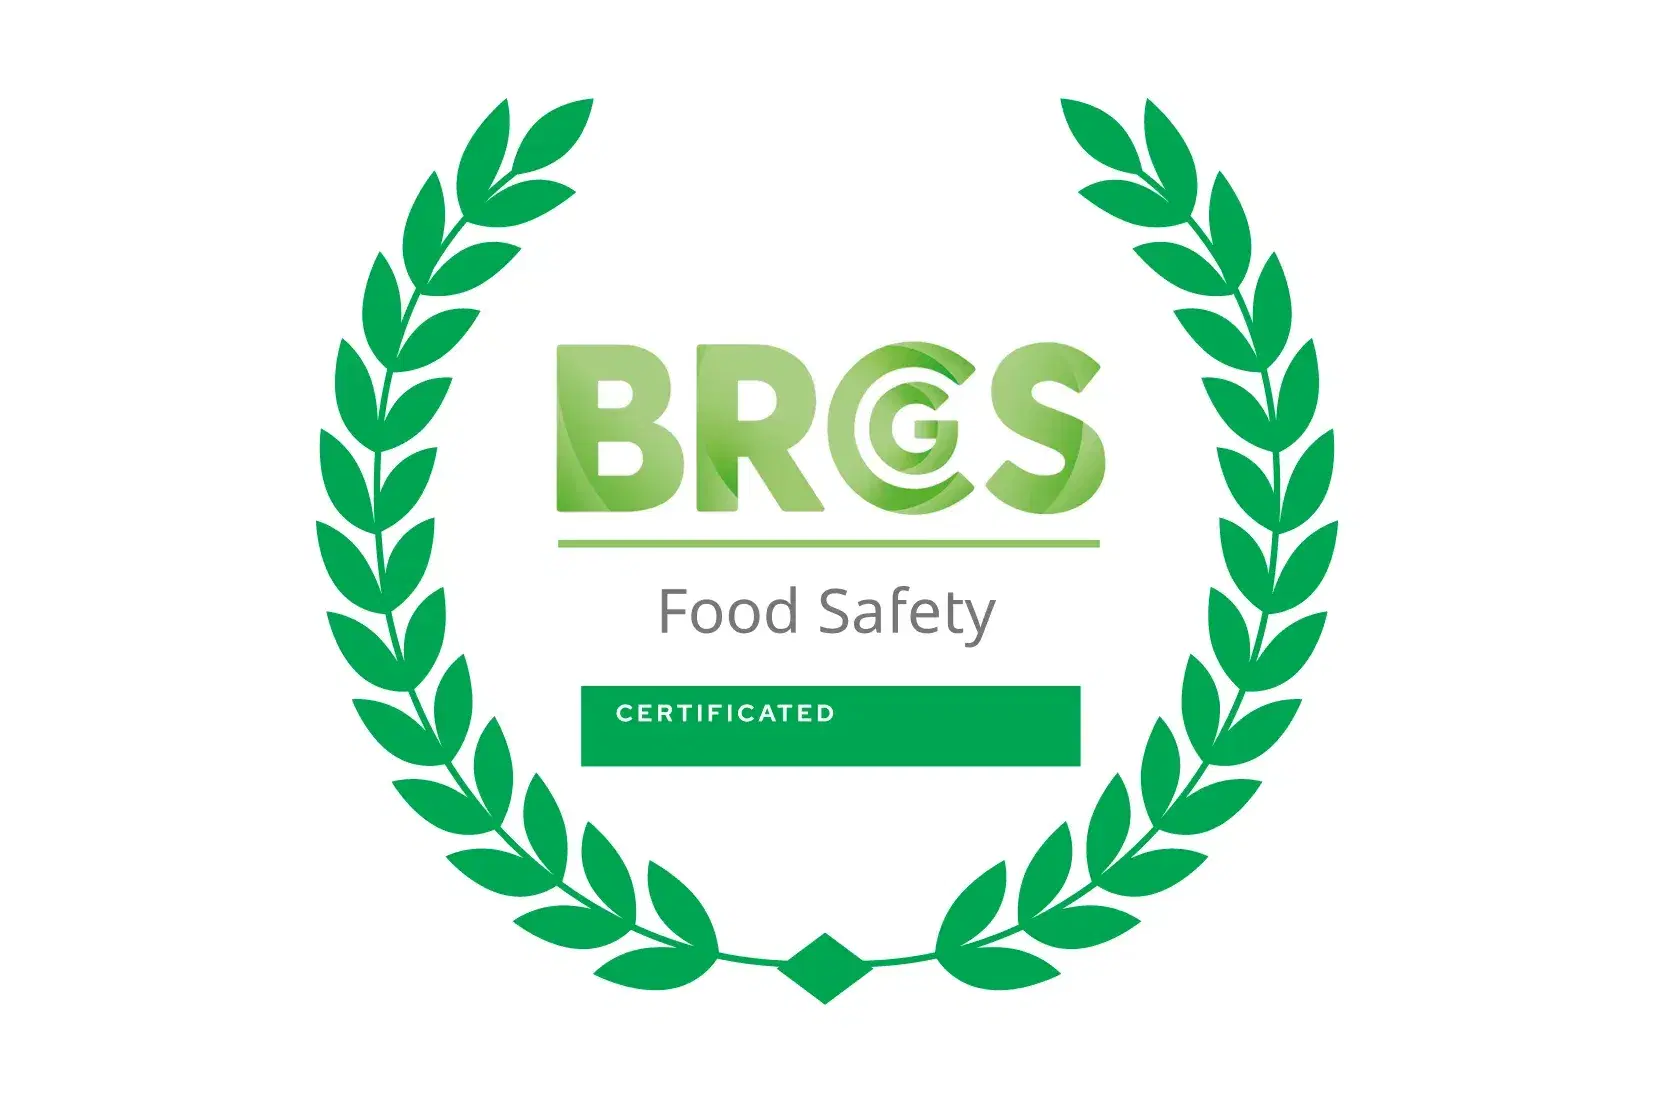 BRCGS Food Safety Certificate